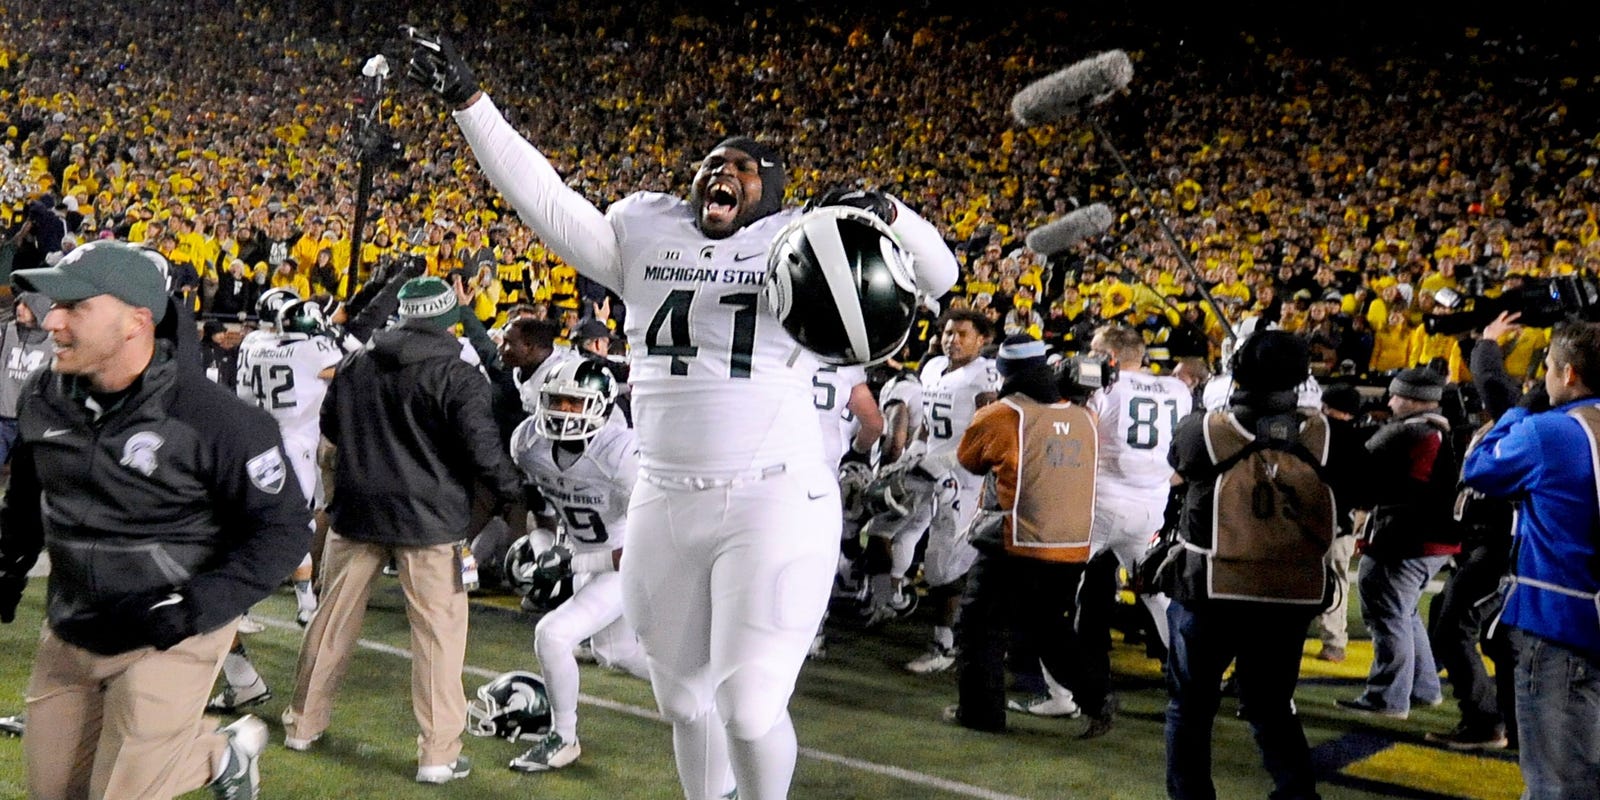 Michigan State DL Owens to play last game against home state